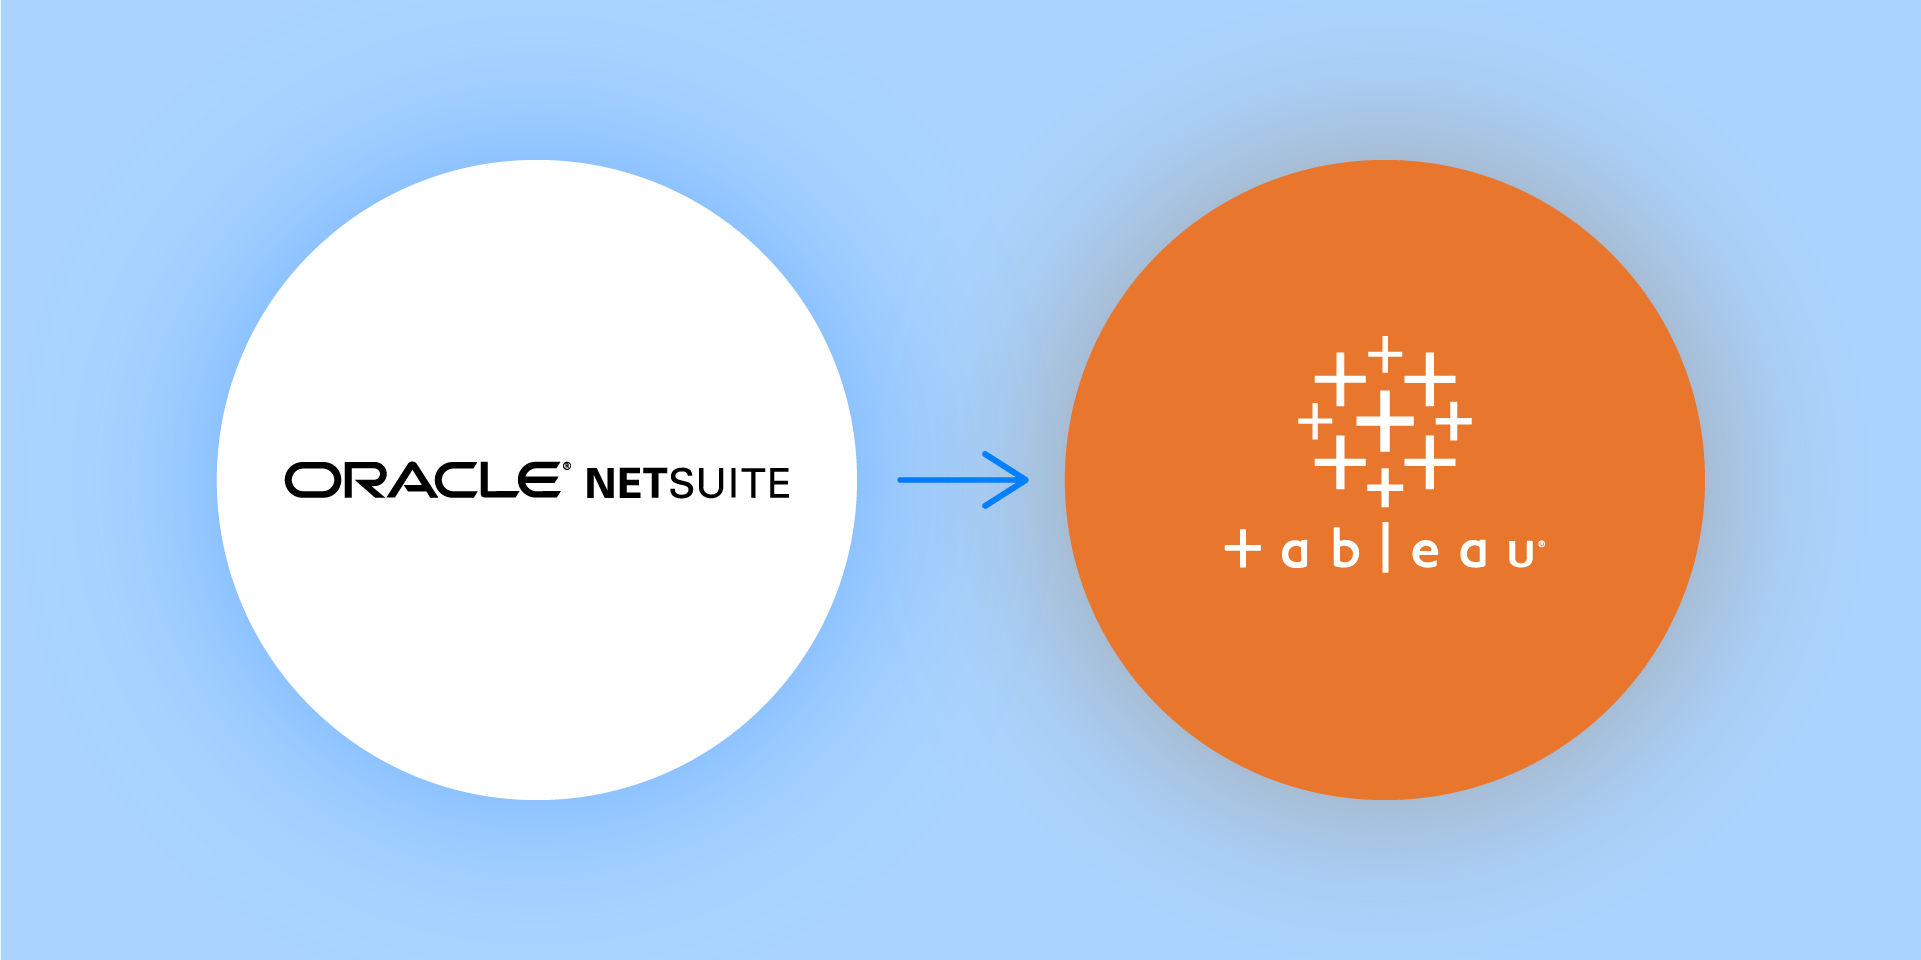 Use Fivetran, Snowflake and Tableau to get a handle on NetSuite data